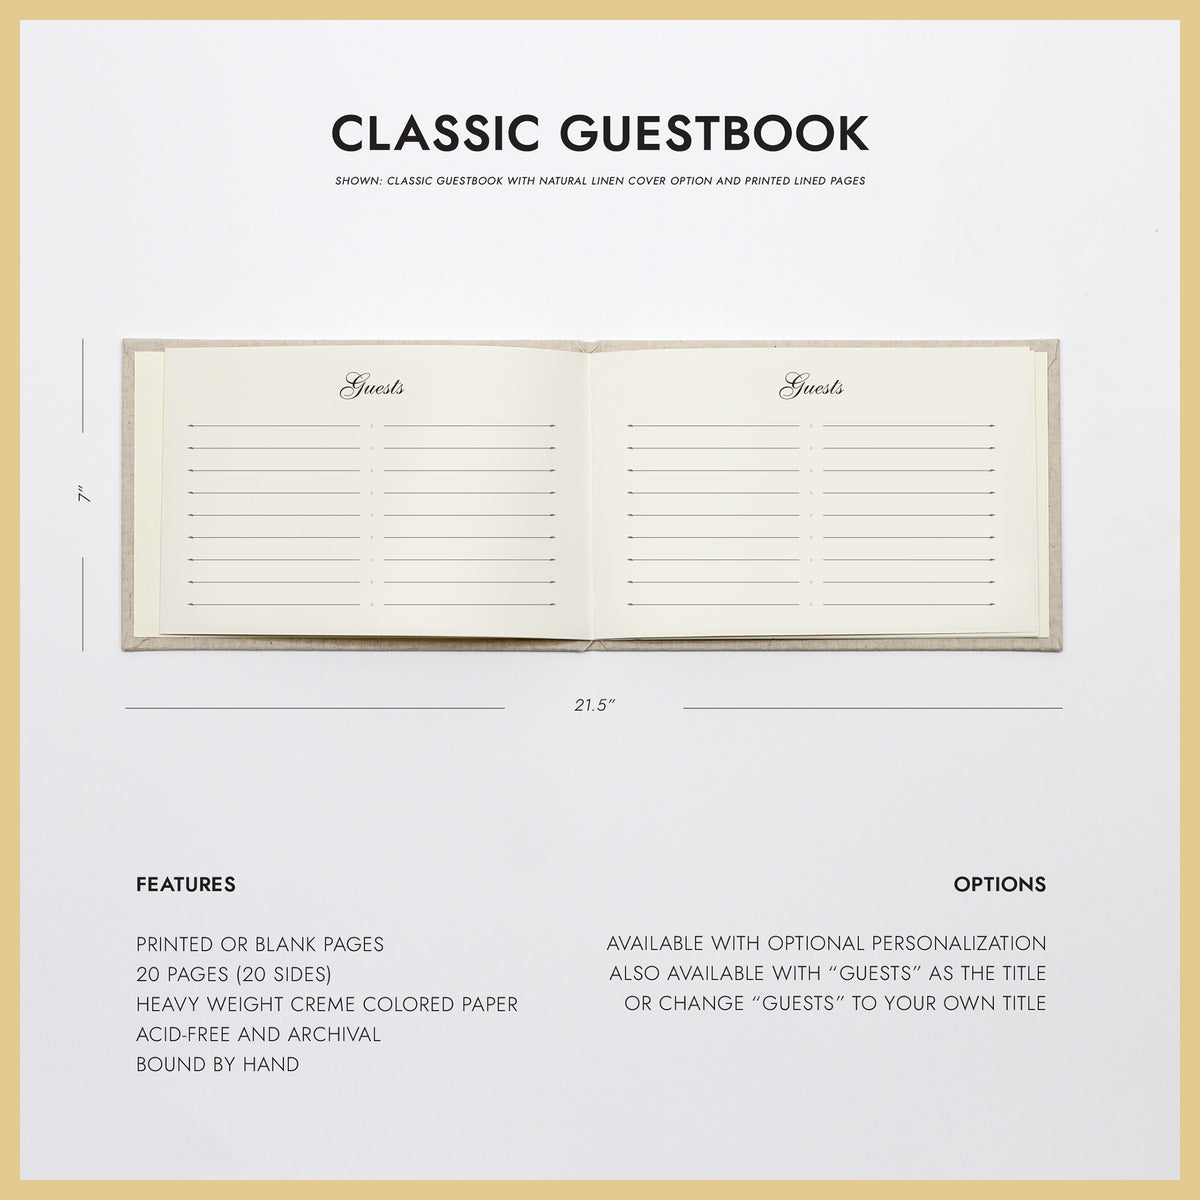 Classic Guestbook | Cover: Misty Blue Silk | Available Personalized